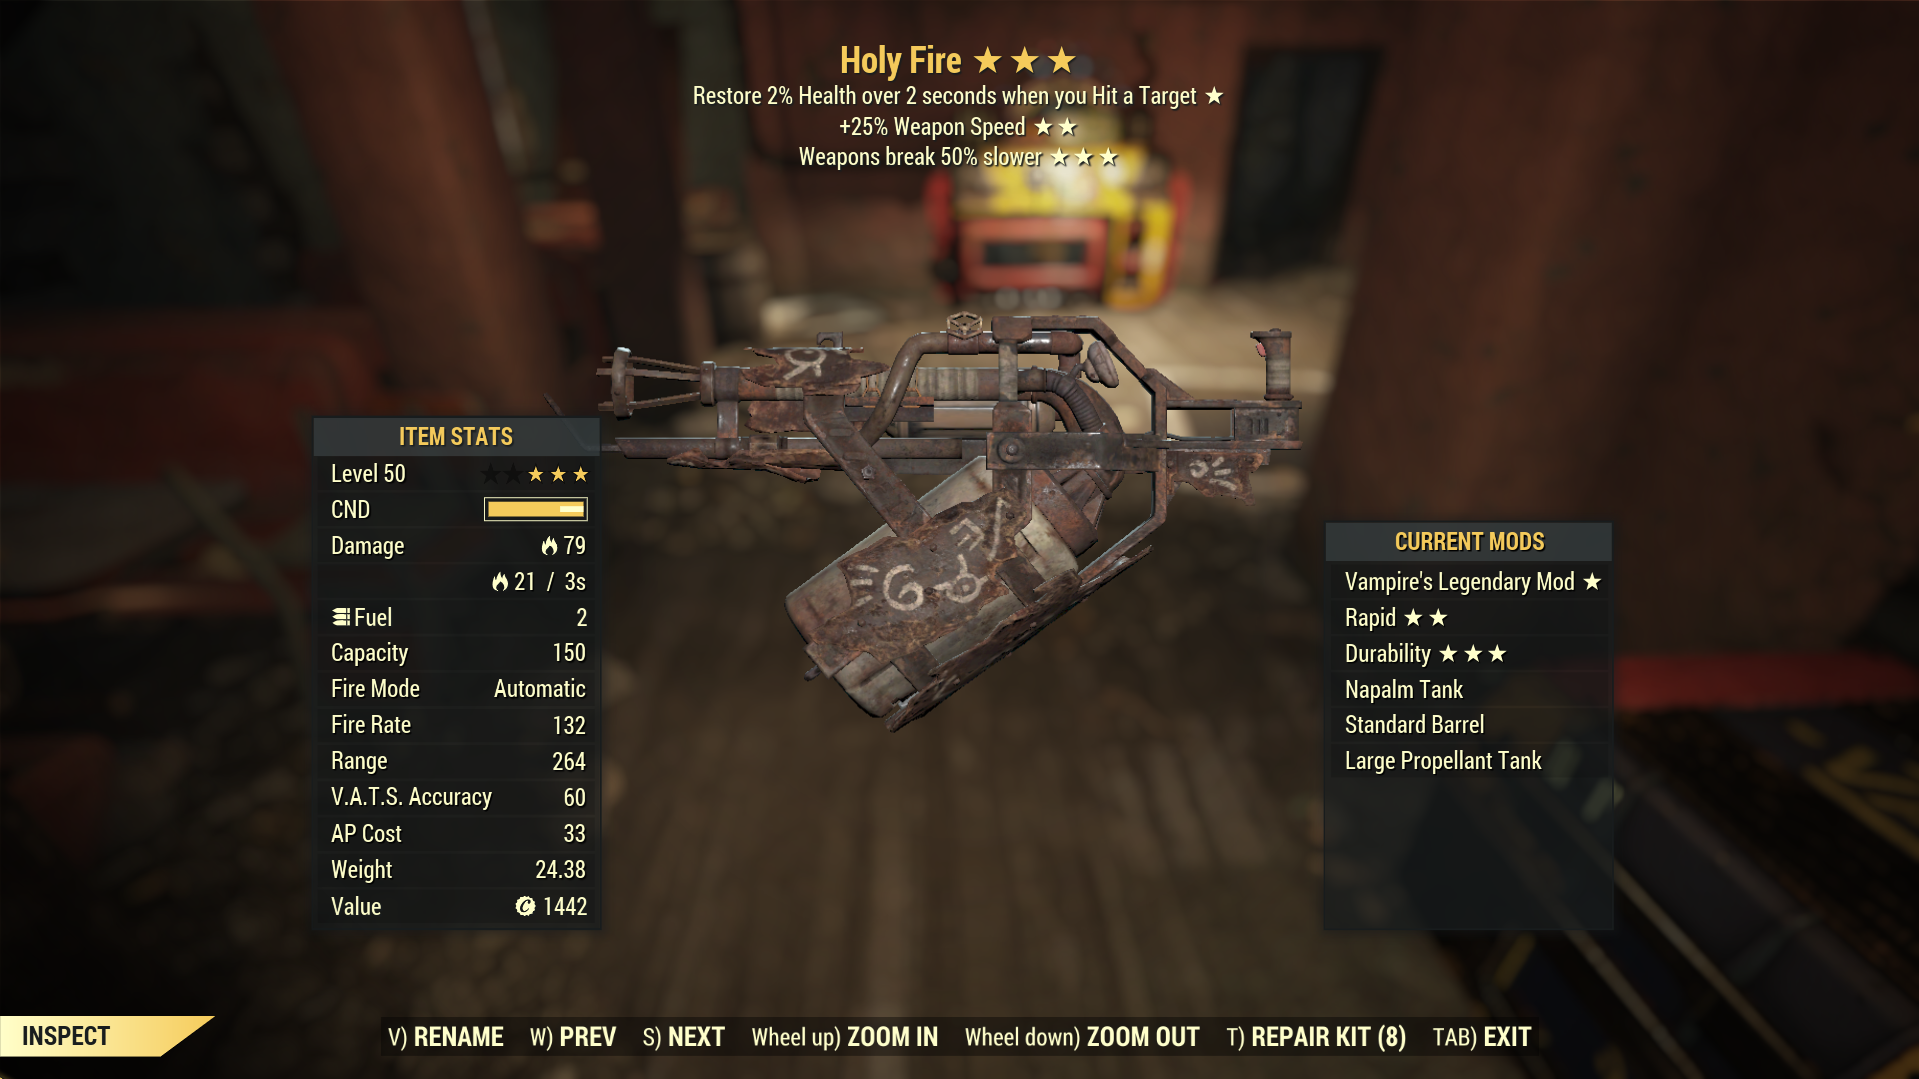 Holy Fire's base stats in Fallout 76